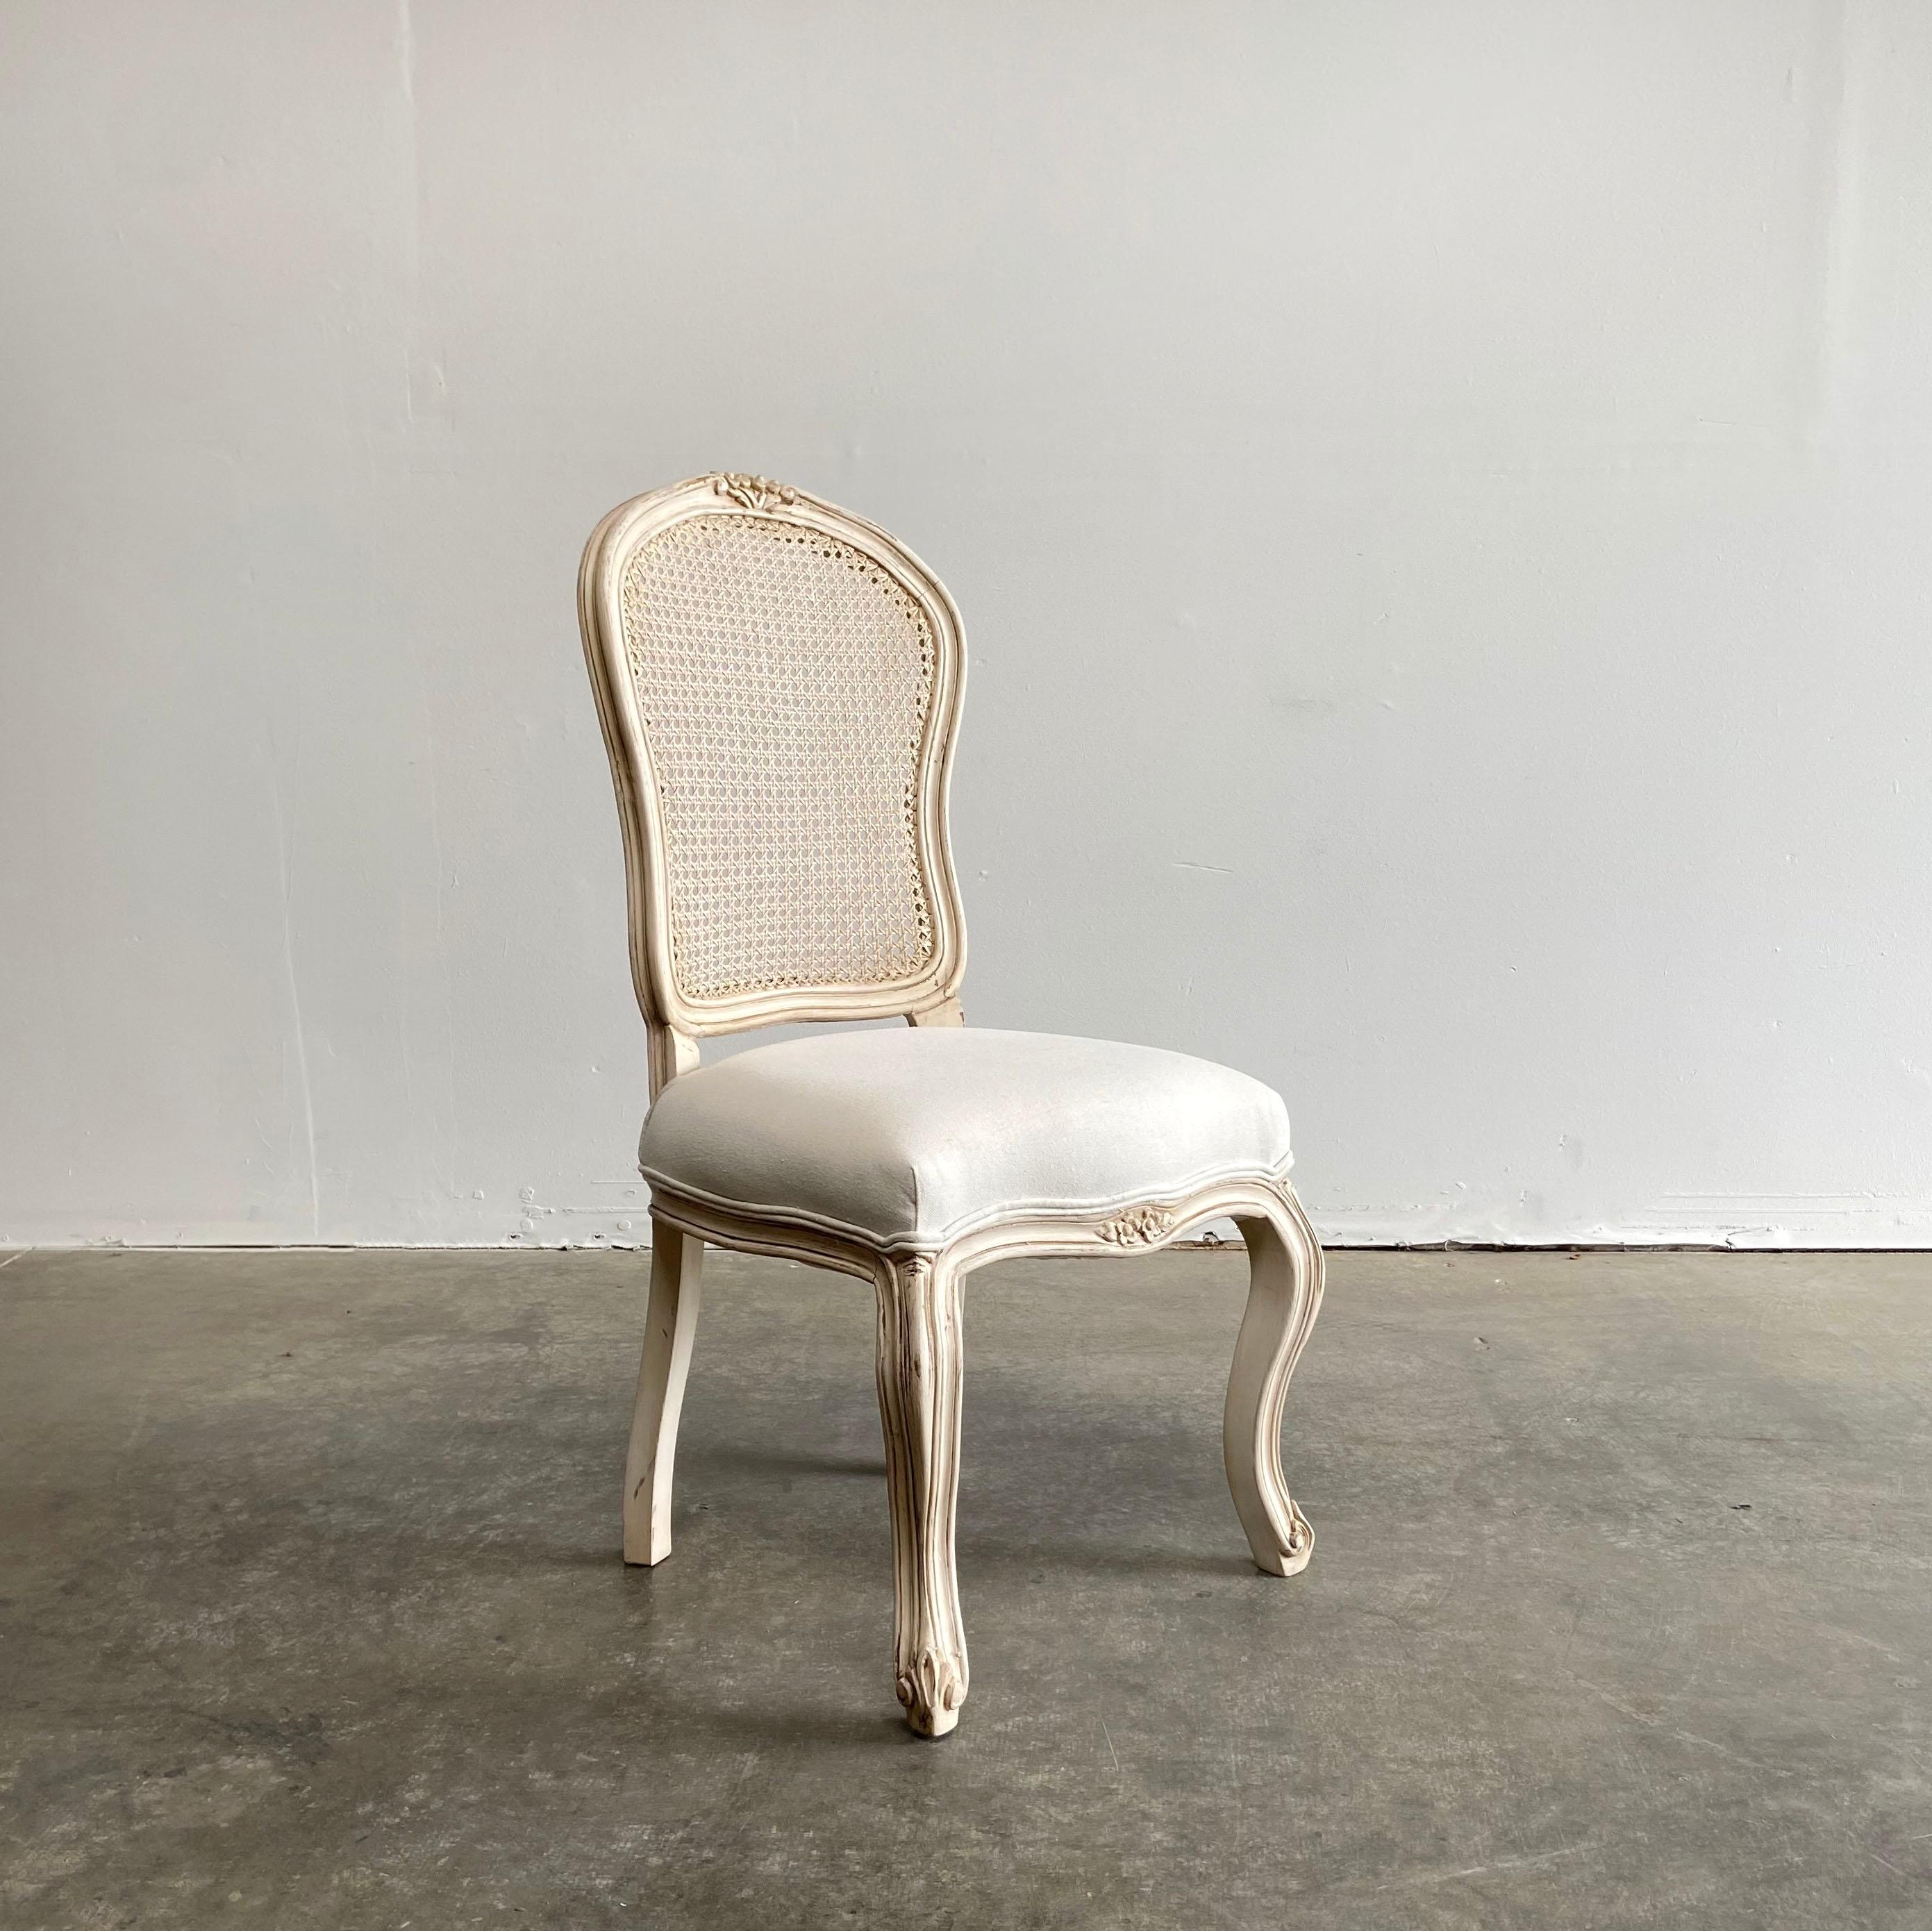 Set of 8 hand carved French Louis XV style painted and upholstered cane back chairs.
Distressed painted antique cream colored cane back dining chairs, with cotton upholstered seat.
Measures: 21” W x 22” D x 42” H
Seat height 20”
Seat depth